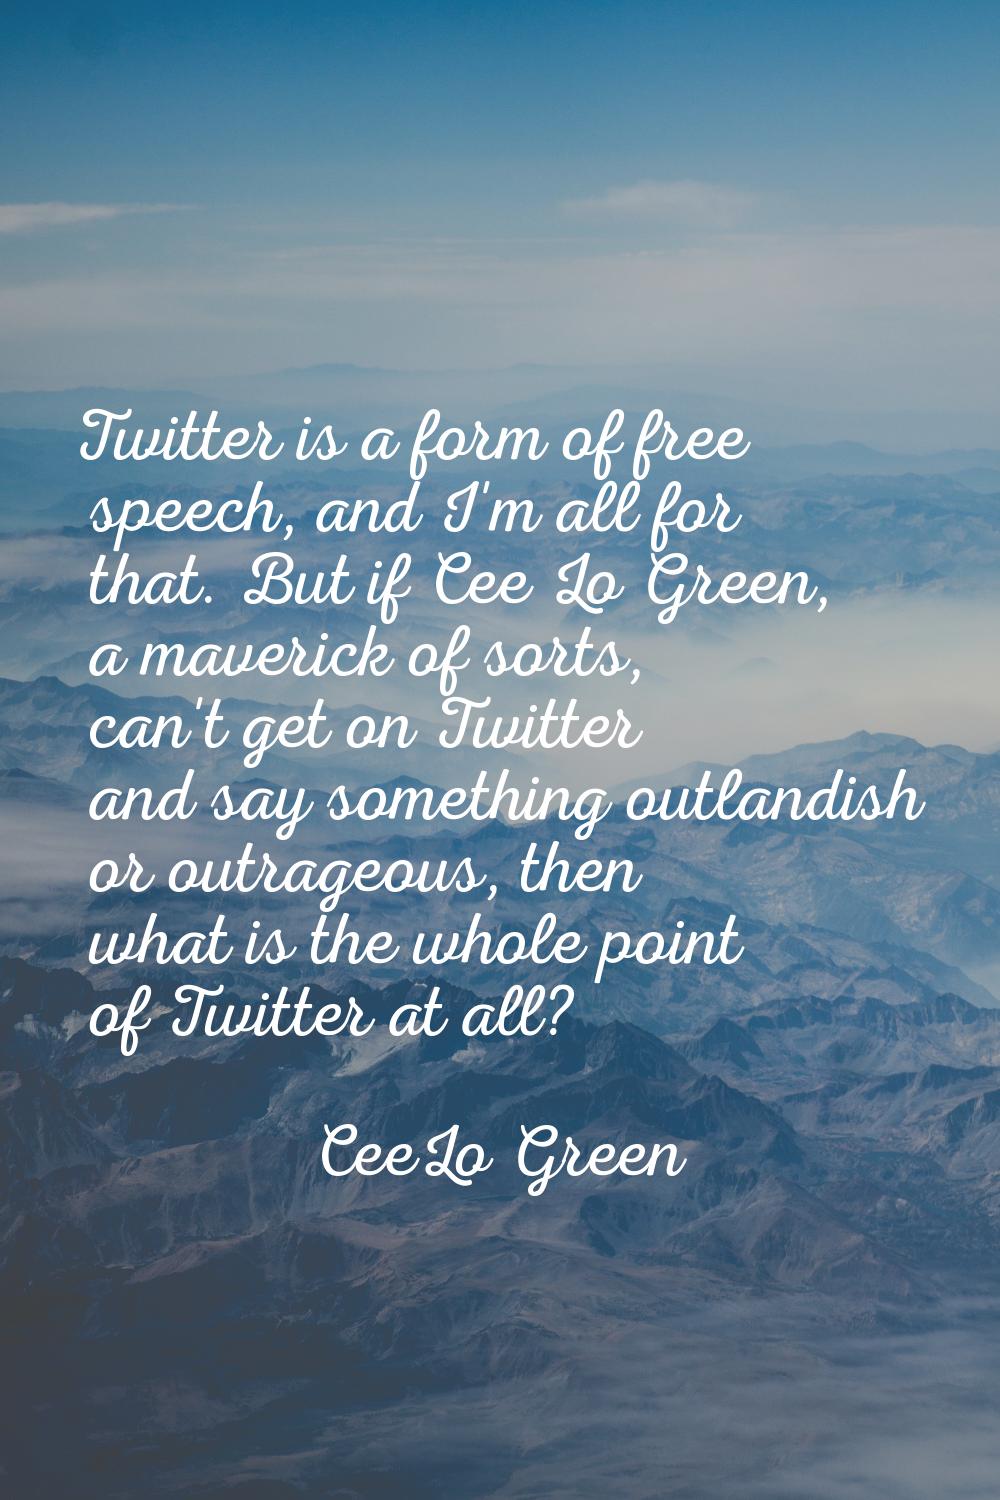 Twitter is a form of free speech, and I'm all for that. But if Cee Lo Green, a maverick of sorts, c